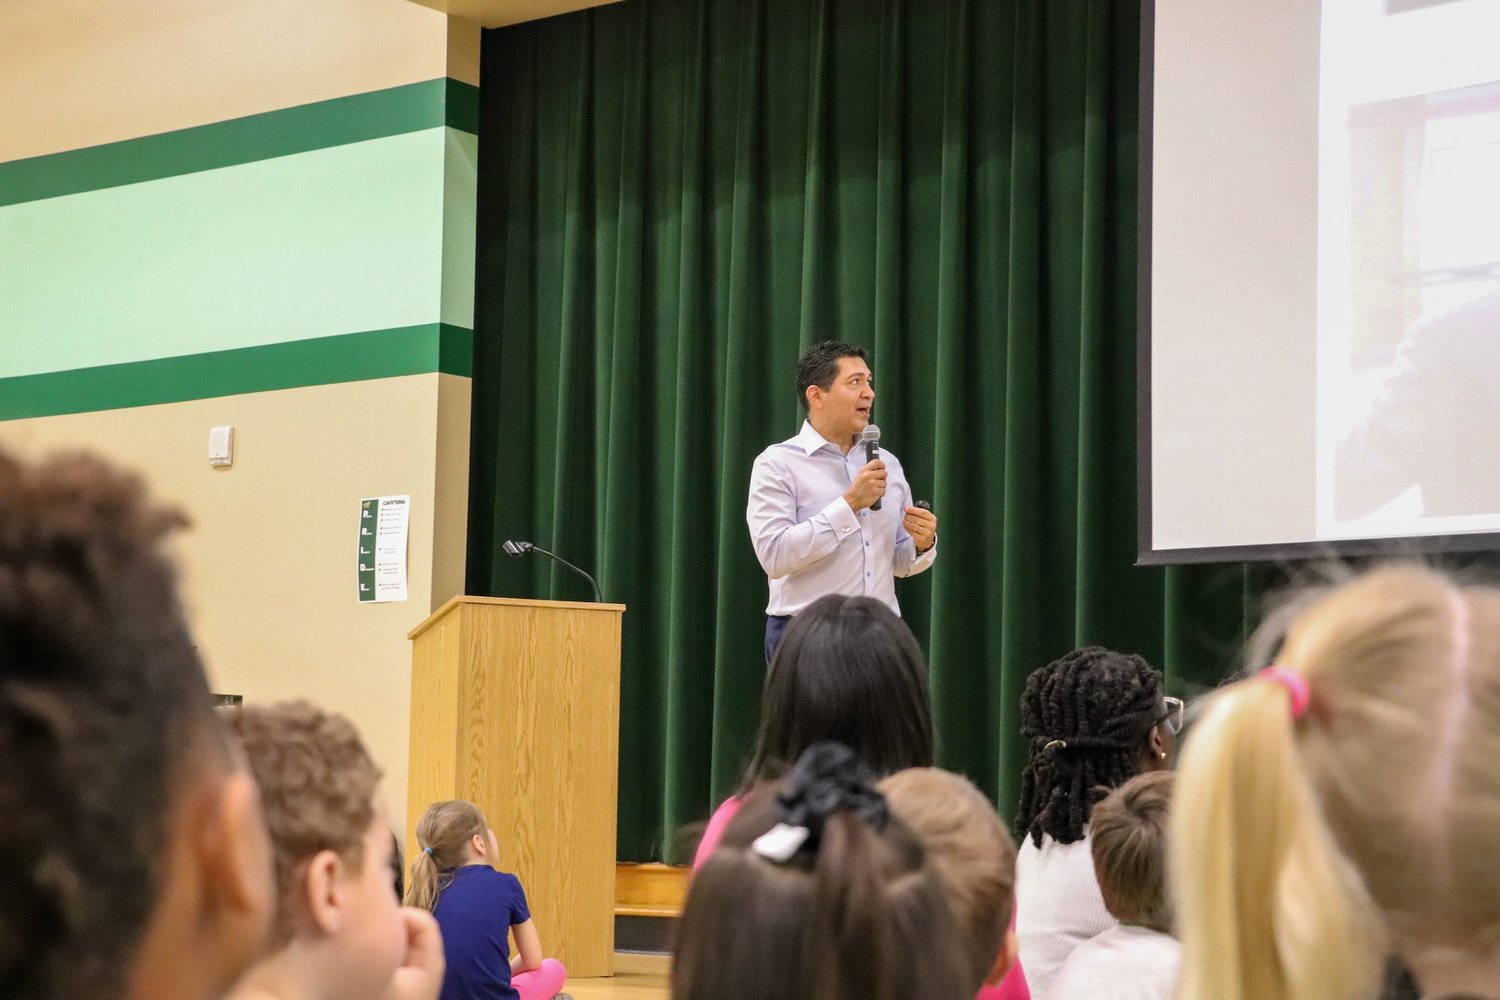 KPRC meteorologist Anthony Yanez spoke Jan. 18 at Cimarron Elementary about how the water cycle affects the weather.